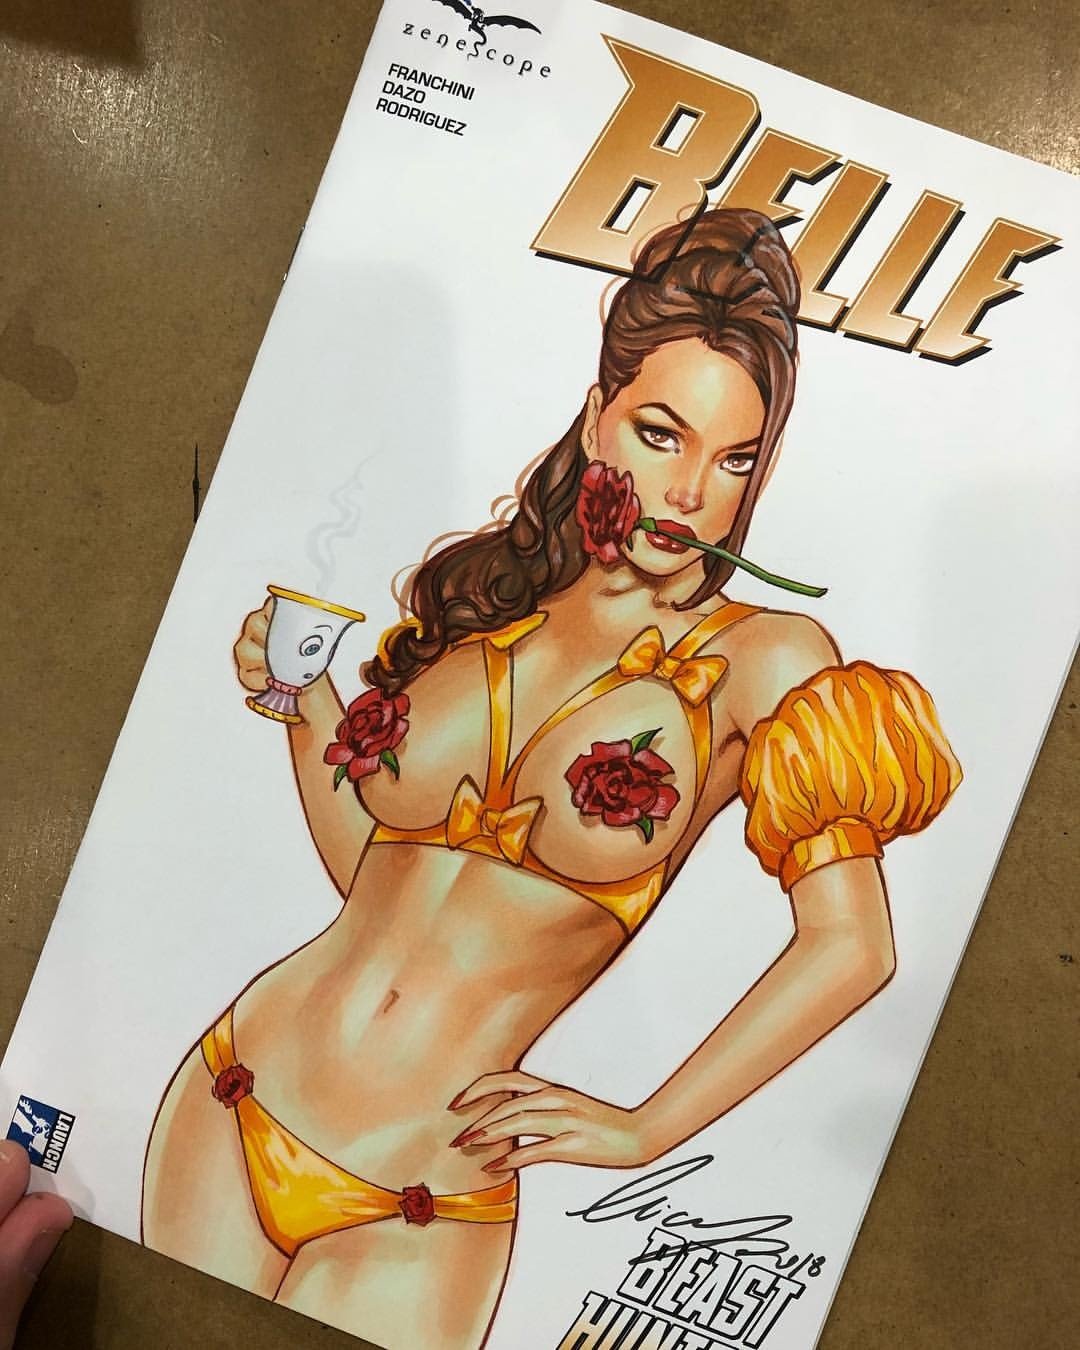 Photo by Justanotherguy with the username @Justanotherguy79,  October 8, 2018 at 3:35 AM and the text says 'eliaschatzoudis:

#belle @zenescope #zenescope Great paper for markers! @newyorkcomiccon #nycc2018 #newyorkcomiccon #eliaschatzoudis #copicmarker #fabercastell #art #artist #comicart #comiccon #design #originalart #elias #copic #coverart #cover..'